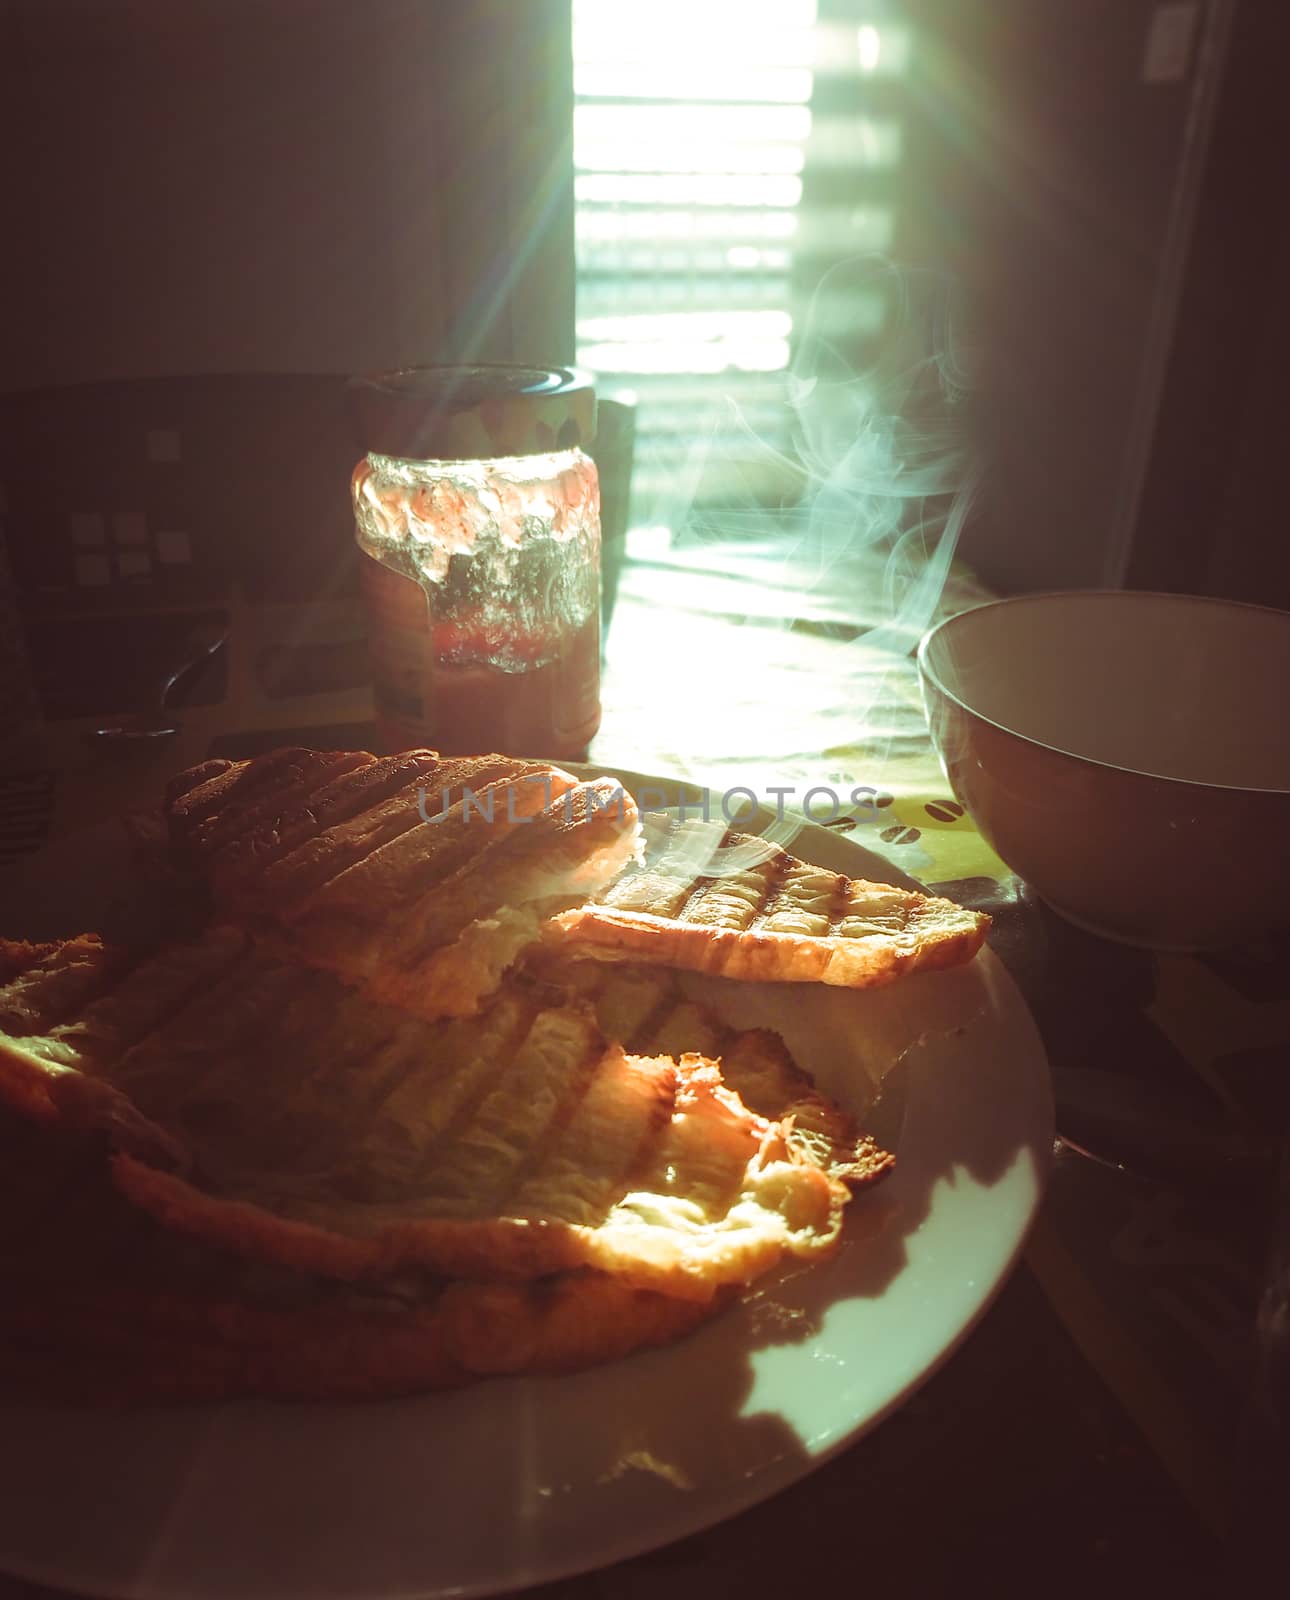 Freshly made breakfast, french croissant toasted with marmalade by tanaonte